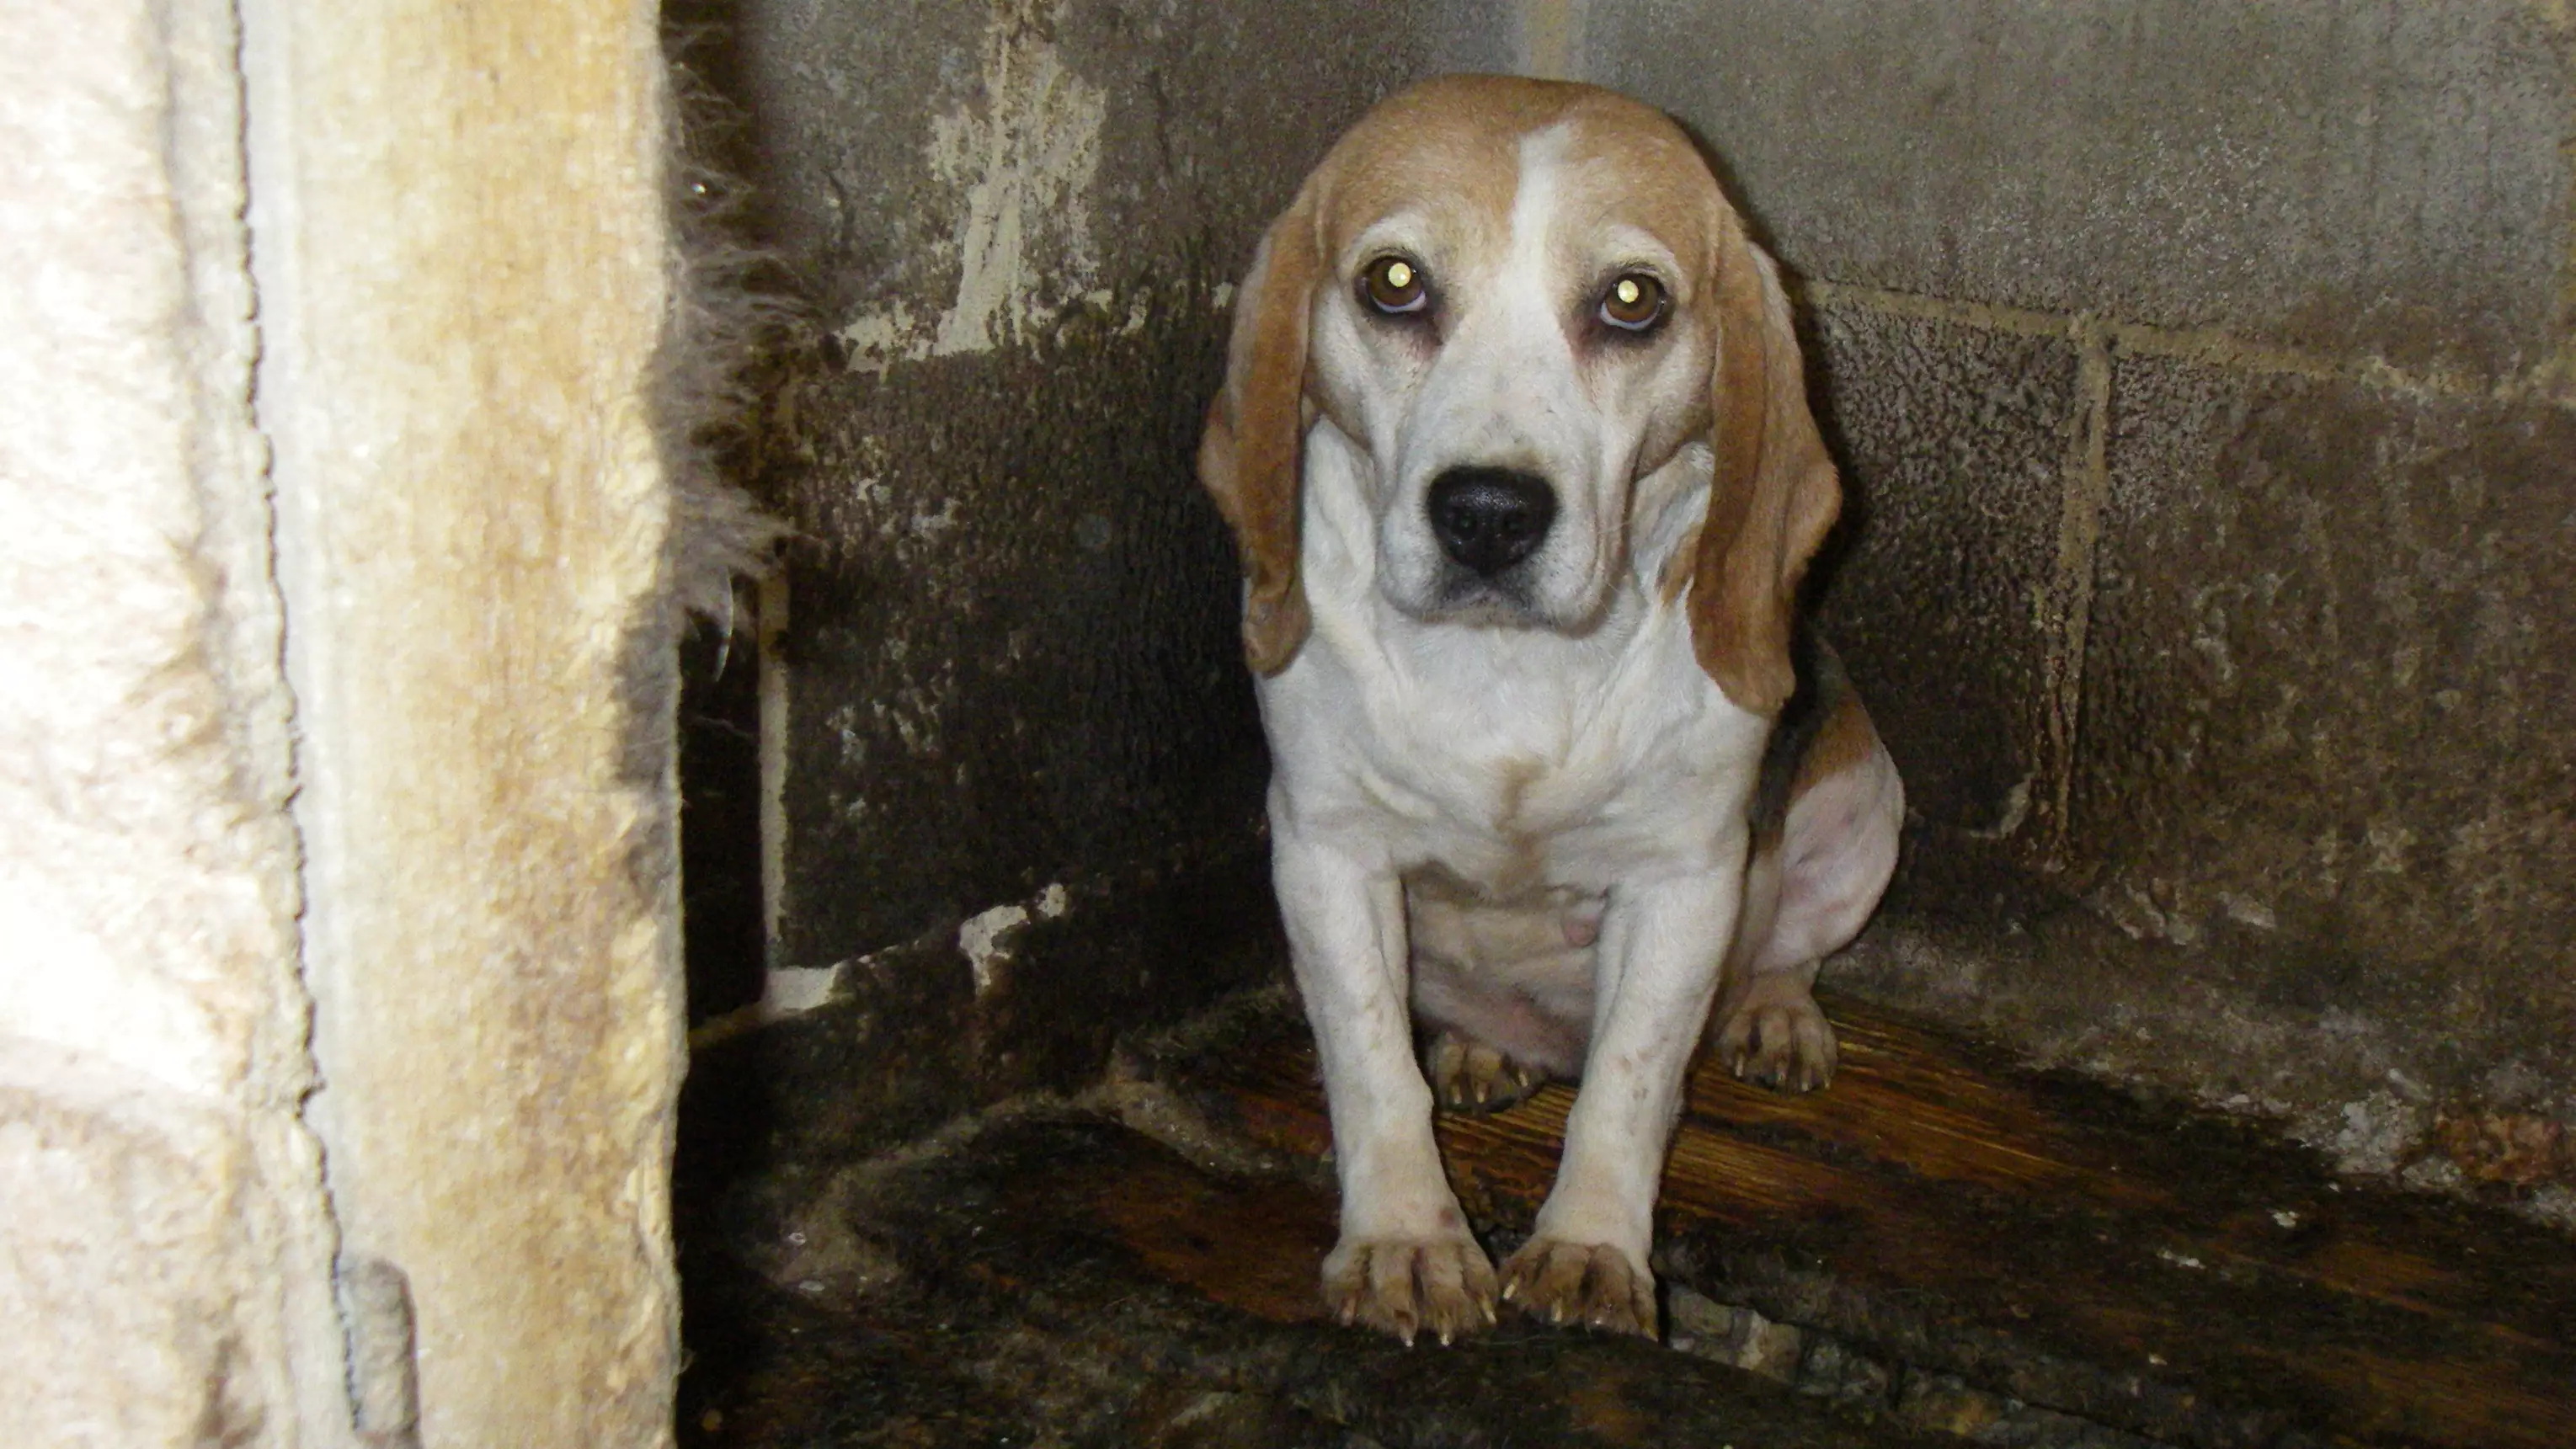 Sick Puppy Farmer Kept 20 Dogs In Cold Kennels Without Any Light